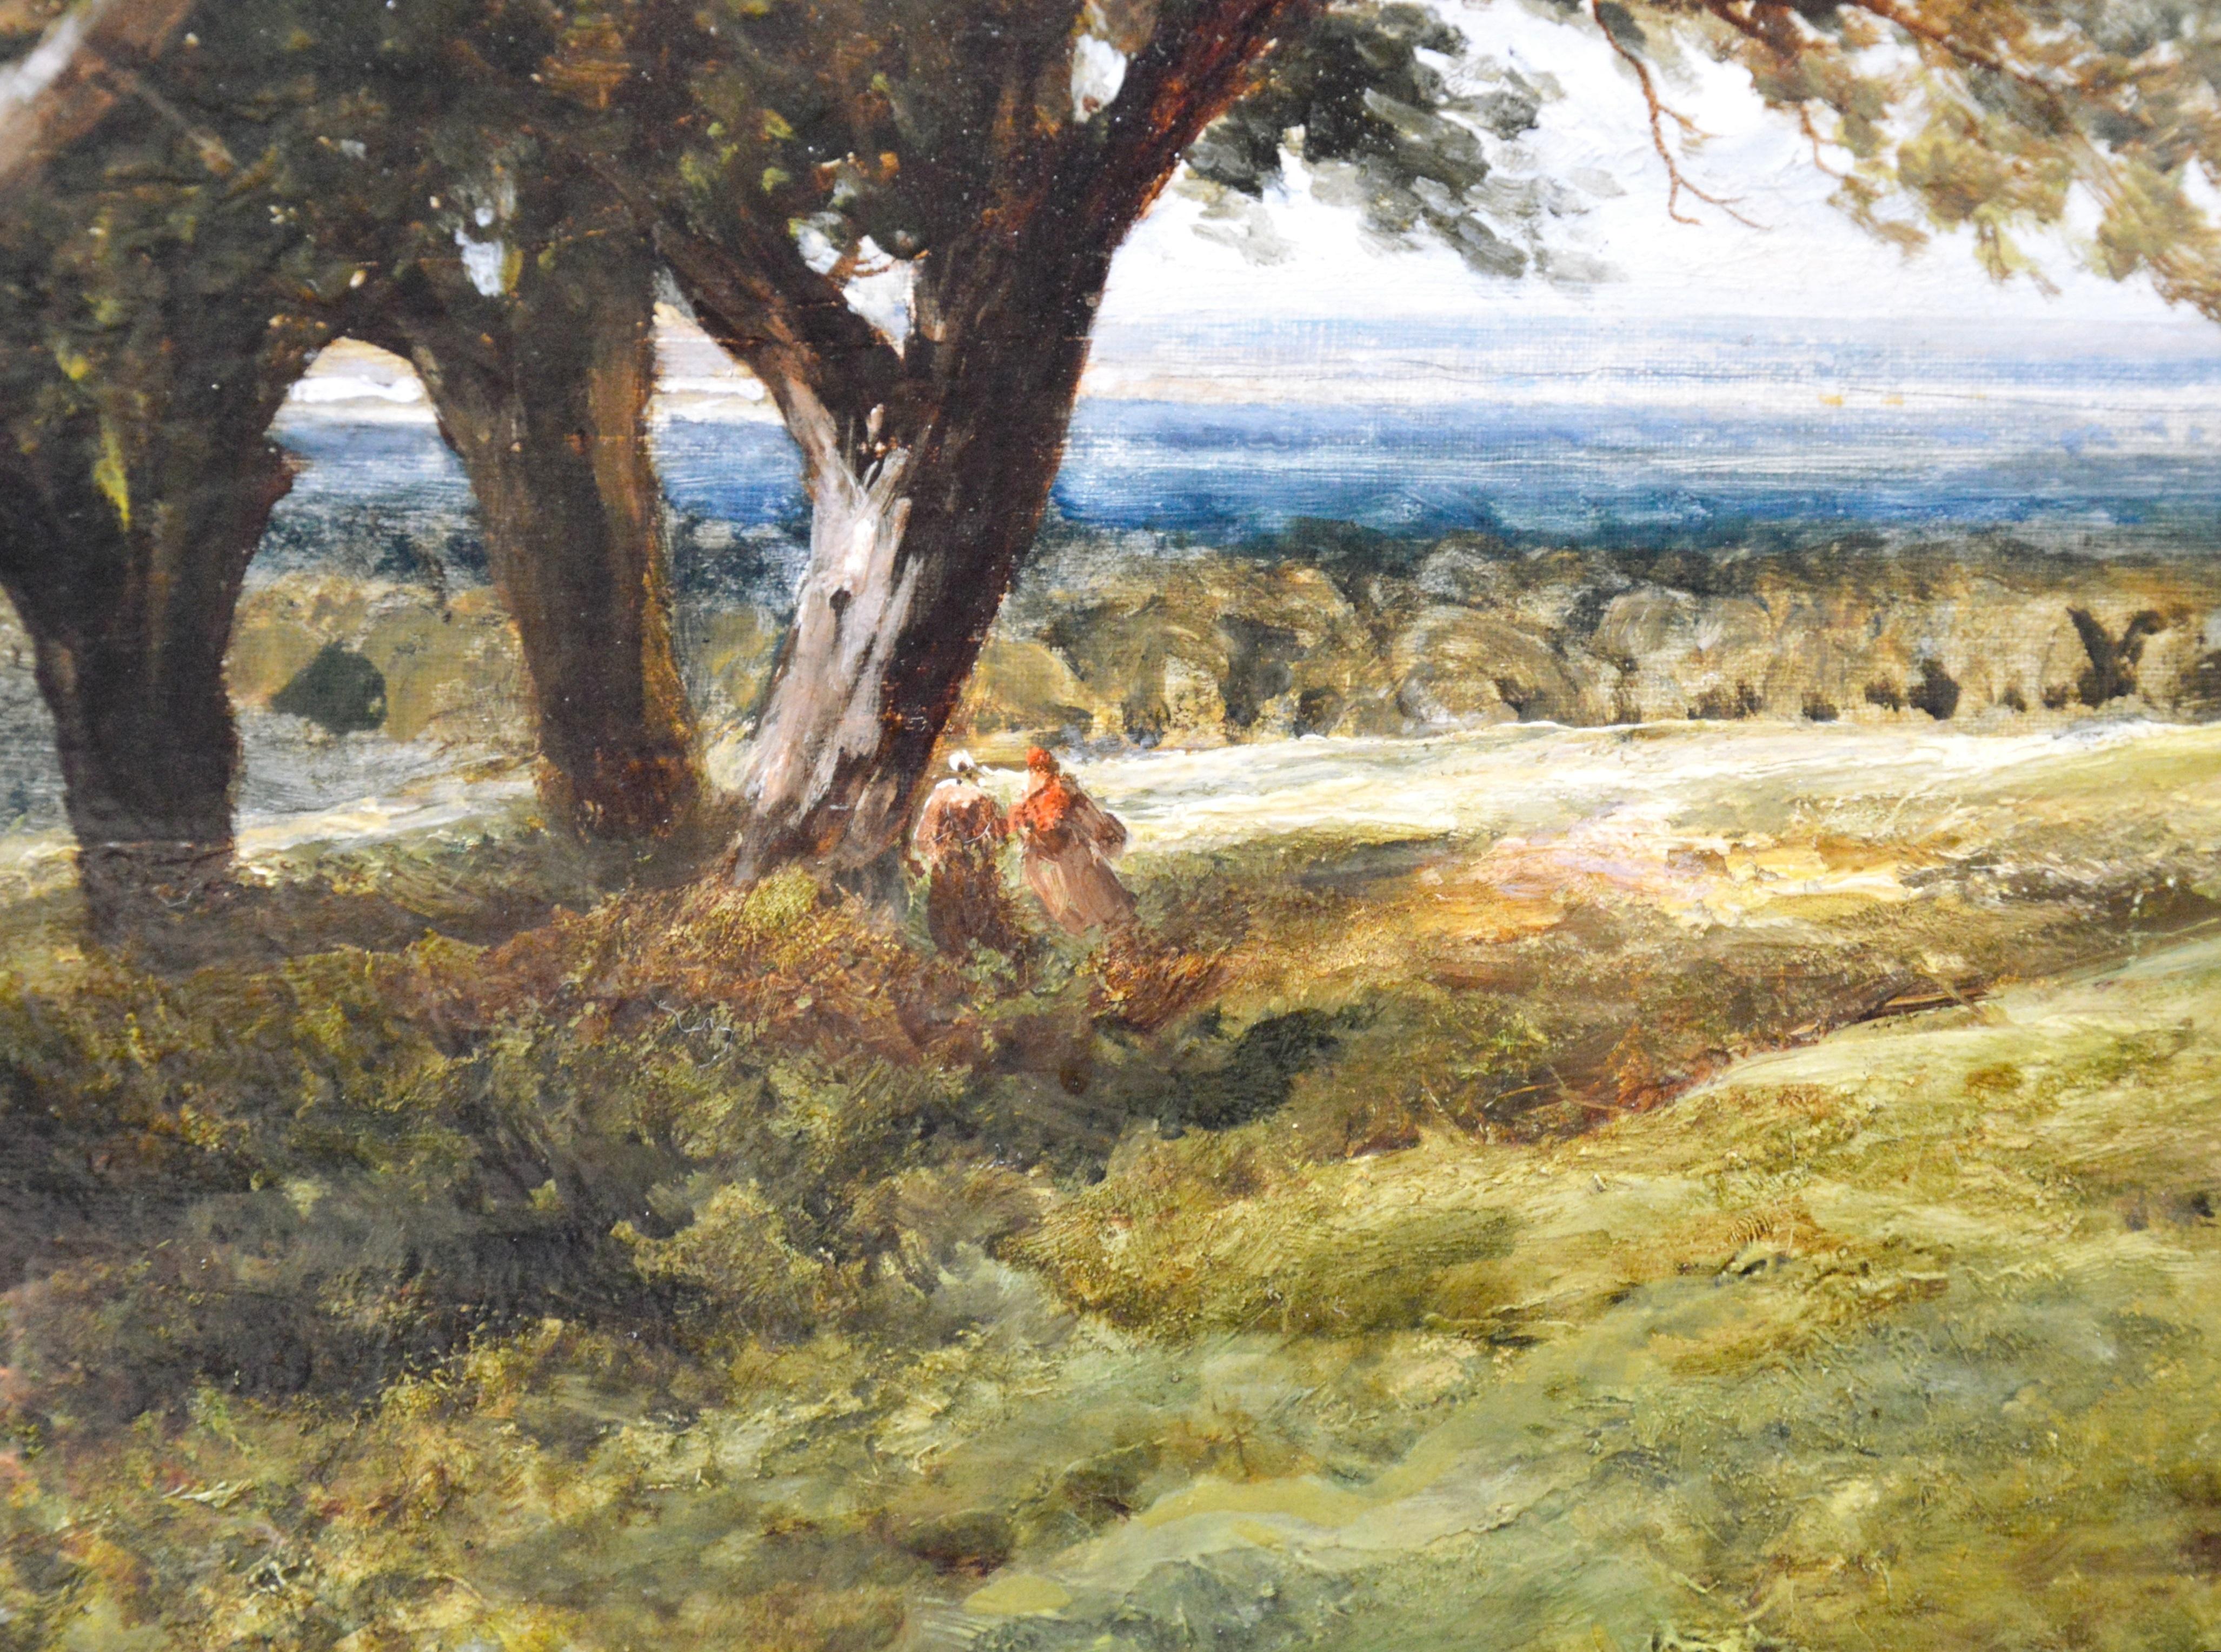 'On the South Downs' by Edmund Morison Wimperis (1835-1900).

A very large fine 19th century landscape oil on canvas by the eminent Victorian landscape painter Edmund Morison Wimperis. The painting is signed by the artist and hangs in a superb newly